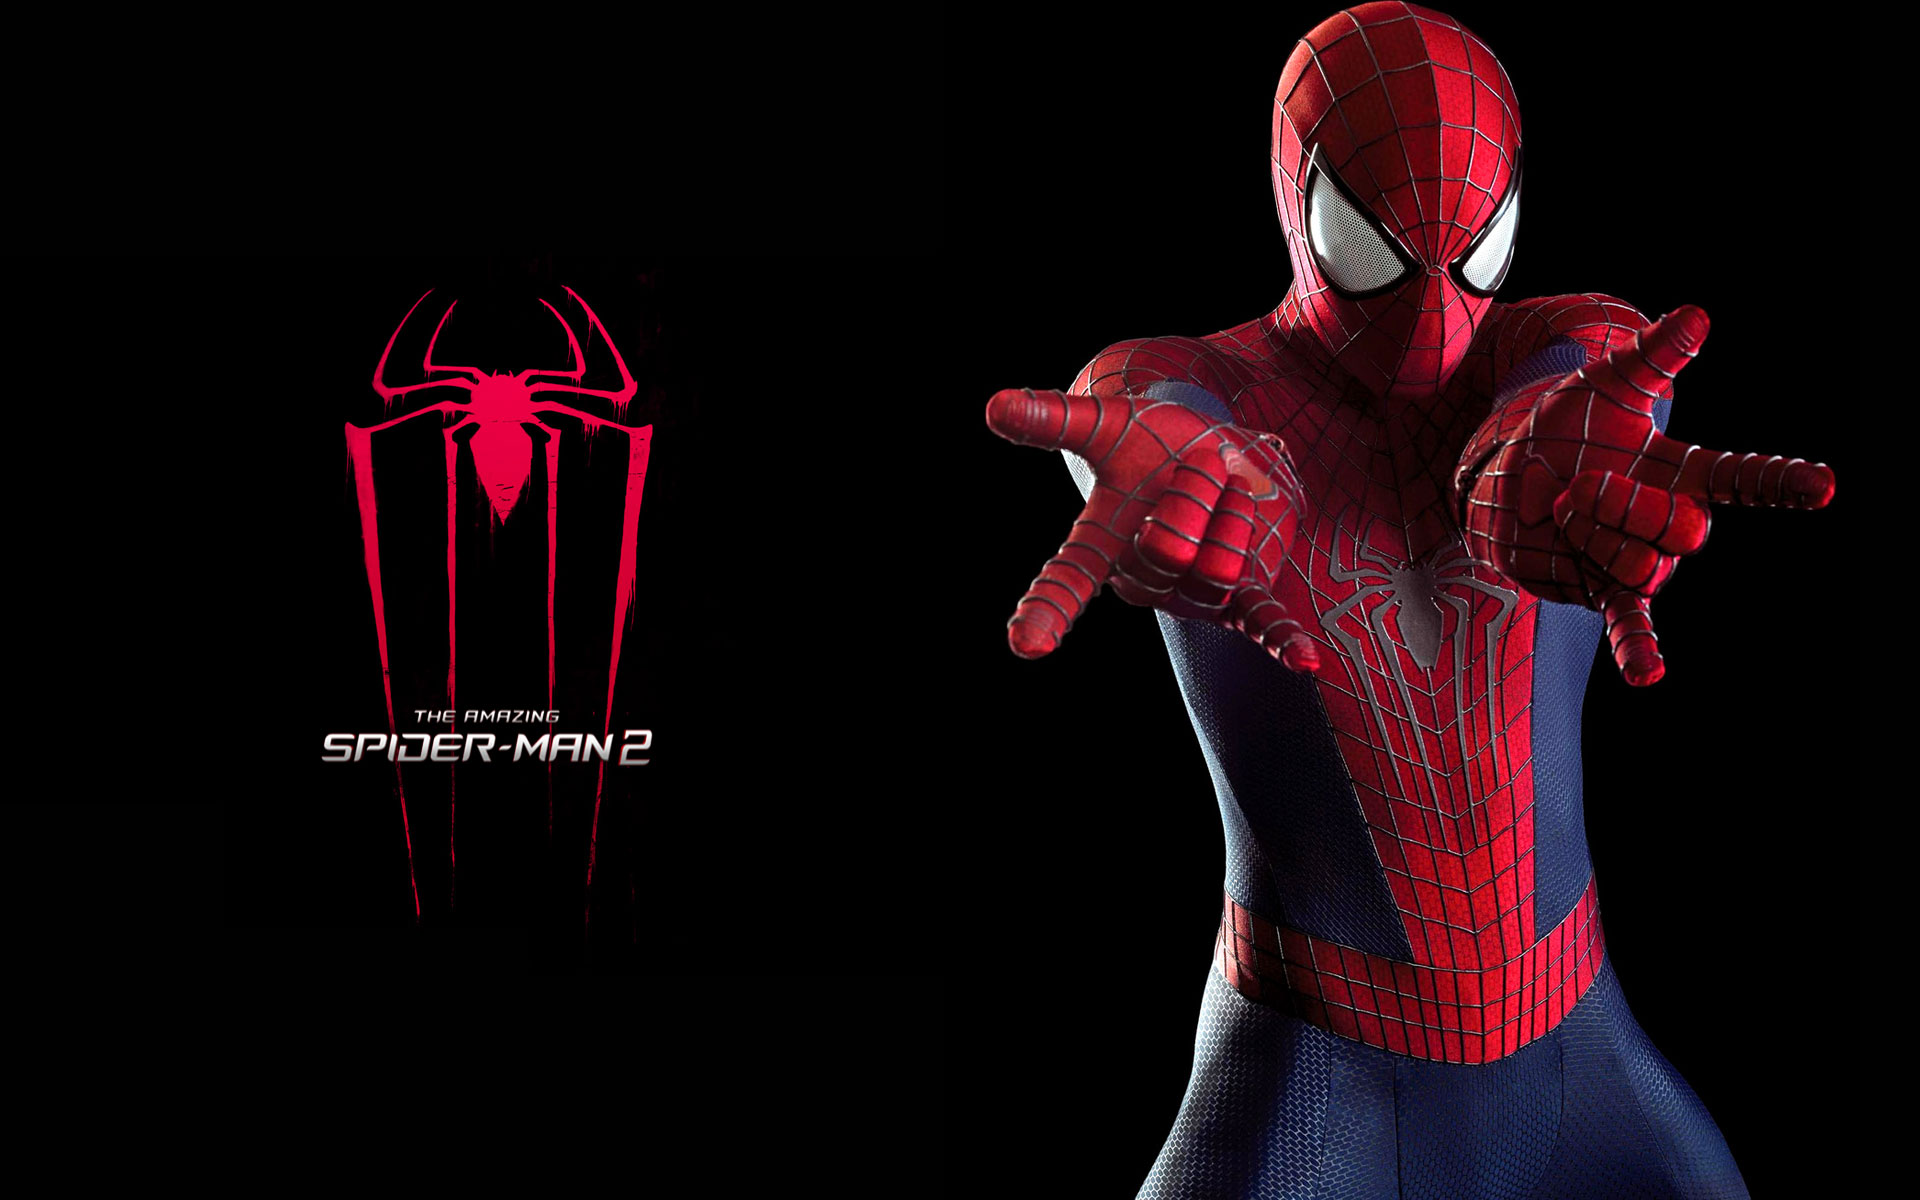 The Amazing Spider Man 2 Wallpapers [HD] Cover Photos